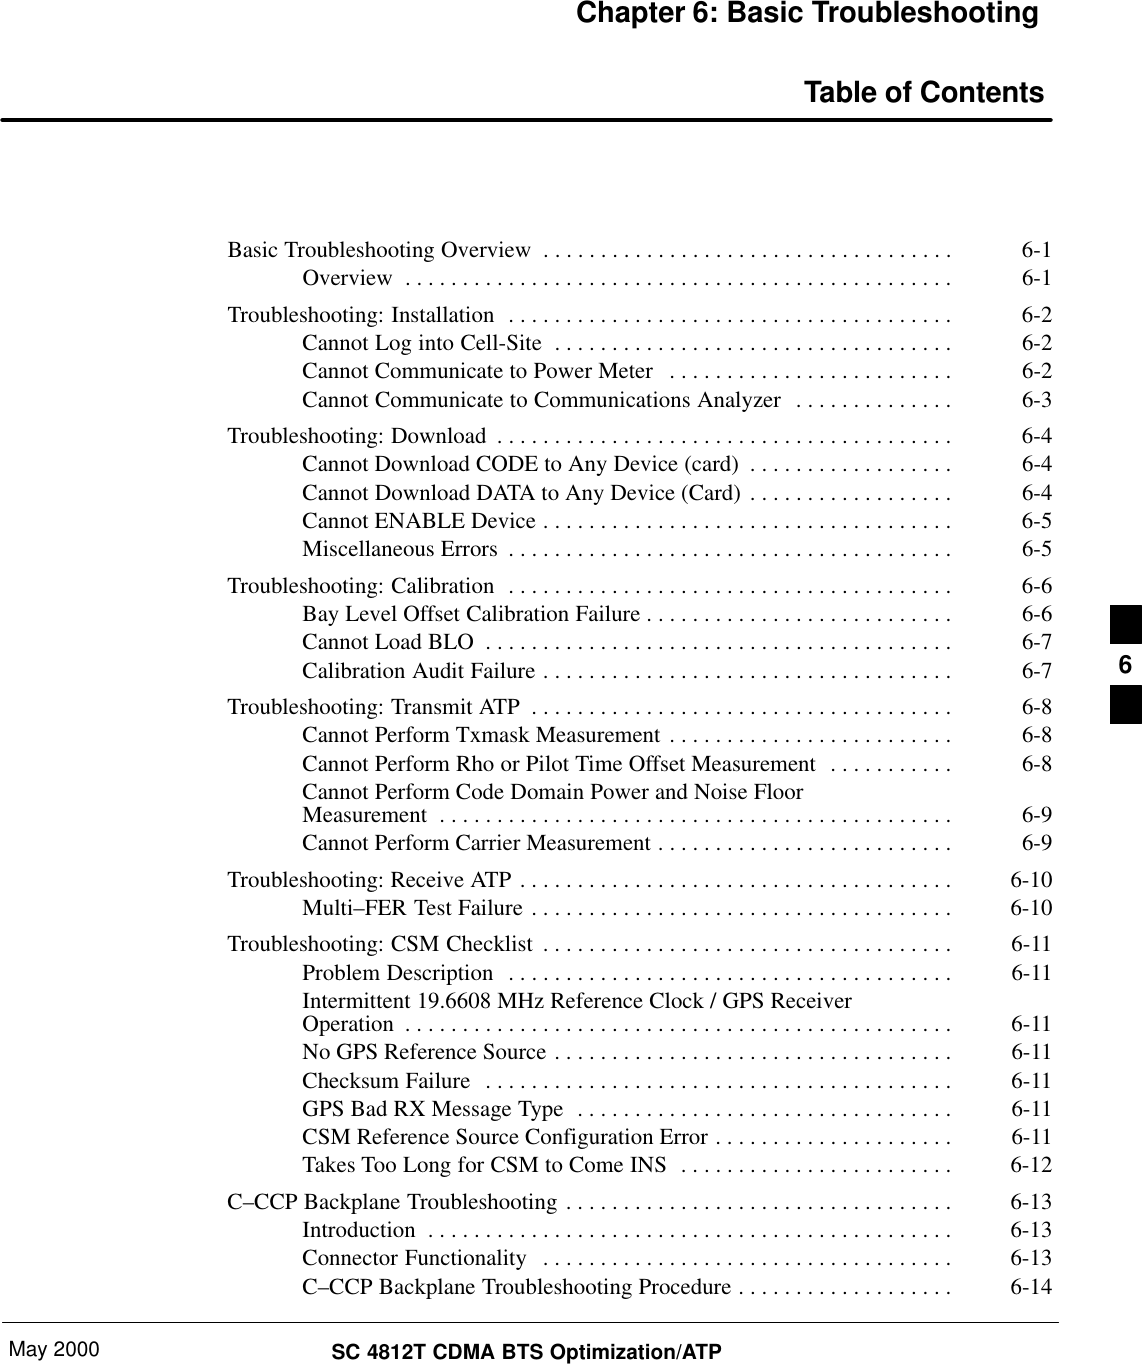 May 2000 SC 4812T CDMA BTS Optimization/ATPChapter 6: Basic TroubleshootingTable of ContentsBasic Troubleshooting Overview 6-1. . . . . . . . . . . . . . . . . . . . . . . . . . . . . . . . . . . . Overview 6-1. . . . . . . . . . . . . . . . . . . . . . . . . . . . . . . . . . . . . . . . . . . . . . . . Troubleshooting: Installation 6-2. . . . . . . . . . . . . . . . . . . . . . . . . . . . . . . . . . . . . . . Cannot Log into Cell-Site 6-2. . . . . . . . . . . . . . . . . . . . . . . . . . . . . . . . . . . Cannot Communicate to Power Meter 6-2. . . . . . . . . . . . . . . . . . . . . . . . . Cannot Communicate to Communications Analyzer 6-3. . . . . . . . . . . . . . Troubleshooting: Download 6-4. . . . . . . . . . . . . . . . . . . . . . . . . . . . . . . . . . . . . . . . Cannot Download CODE to Any Device (card) 6-4. . . . . . . . . . . . . . . . . . Cannot Download DATA to Any Device (Card) 6-4. . . . . . . . . . . . . . . . . . Cannot ENABLE Device 6-5. . . . . . . . . . . . . . . . . . . . . . . . . . . . . . . . . . . . Miscellaneous Errors 6-5. . . . . . . . . . . . . . . . . . . . . . . . . . . . . . . . . . . . . . . Troubleshooting: Calibration 6-6. . . . . . . . . . . . . . . . . . . . . . . . . . . . . . . . . . . . . . . Bay Level Offset Calibration Failure 6-6. . . . . . . . . . . . . . . . . . . . . . . . . . . Cannot Load BLO 6-7. . . . . . . . . . . . . . . . . . . . . . . . . . . . . . . . . . . . . . . . . Calibration Audit Failure 6-7. . . . . . . . . . . . . . . . . . . . . . . . . . . . . . . . . . . . Troubleshooting: Transmit ATP 6-8. . . . . . . . . . . . . . . . . . . . . . . . . . . . . . . . . . . . . Cannot Perform Txmask Measurement 6-8. . . . . . . . . . . . . . . . . . . . . . . . . Cannot Perform Rho or Pilot Time Offset Measurement 6-8. . . . . . . . . . . Cannot Perform Code Domain Power and Noise FloorMeasurement 6-9. . . . . . . . . . . . . . . . . . . . . . . . . . . . . . . . . . . . . . . . . . . . . Cannot Perform Carrier Measurement 6-9. . . . . . . . . . . . . . . . . . . . . . . . . . Troubleshooting: Receive ATP 6-10. . . . . . . . . . . . . . . . . . . . . . . . . . . . . . . . . . . . . . Multi–FER Test Failure 6-10. . . . . . . . . . . . . . . . . . . . . . . . . . . . . . . . . . . . . Troubleshooting: CSM Checklist 6-11. . . . . . . . . . . . . . . . . . . . . . . . . . . . . . . . . . . . Problem Description 6-11. . . . . . . . . . . . . . . . . . . . . . . . . . . . . . . . . . . . . . . Intermittent 19.6608 MHz Reference Clock / GPS ReceiverOperation 6-11. . . . . . . . . . . . . . . . . . . . . . . . . . . . . . . . . . . . . . . . . . . . . . . . No GPS Reference Source 6-11. . . . . . . . . . . . . . . . . . . . . . . . . . . . . . . . . . . Checksum Failure 6-11. . . . . . . . . . . . . . . . . . . . . . . . . . . . . . . . . . . . . . . . . GPS Bad RX Message Type 6-11. . . . . . . . . . . . . . . . . . . . . . . . . . . . . . . . . CSM Reference Source Configuration Error 6-11. . . . . . . . . . . . . . . . . . . . . Takes Too Long for CSM to Come INS 6-12. . . . . . . . . . . . . . . . . . . . . . . . C–CCP Backplane Troubleshooting 6-13. . . . . . . . . . . . . . . . . . . . . . . . . . . . . . . . . . Introduction 6-13. . . . . . . . . . . . . . . . . . . . . . . . . . . . . . . . . . . . . . . . . . . . . . Connector Functionality 6-13. . . . . . . . . . . . . . . . . . . . . . . . . . . . . . . . . . . . C–CCP Backplane Troubleshooting Procedure 6-14. . . . . . . . . . . . . . . . . . . 6